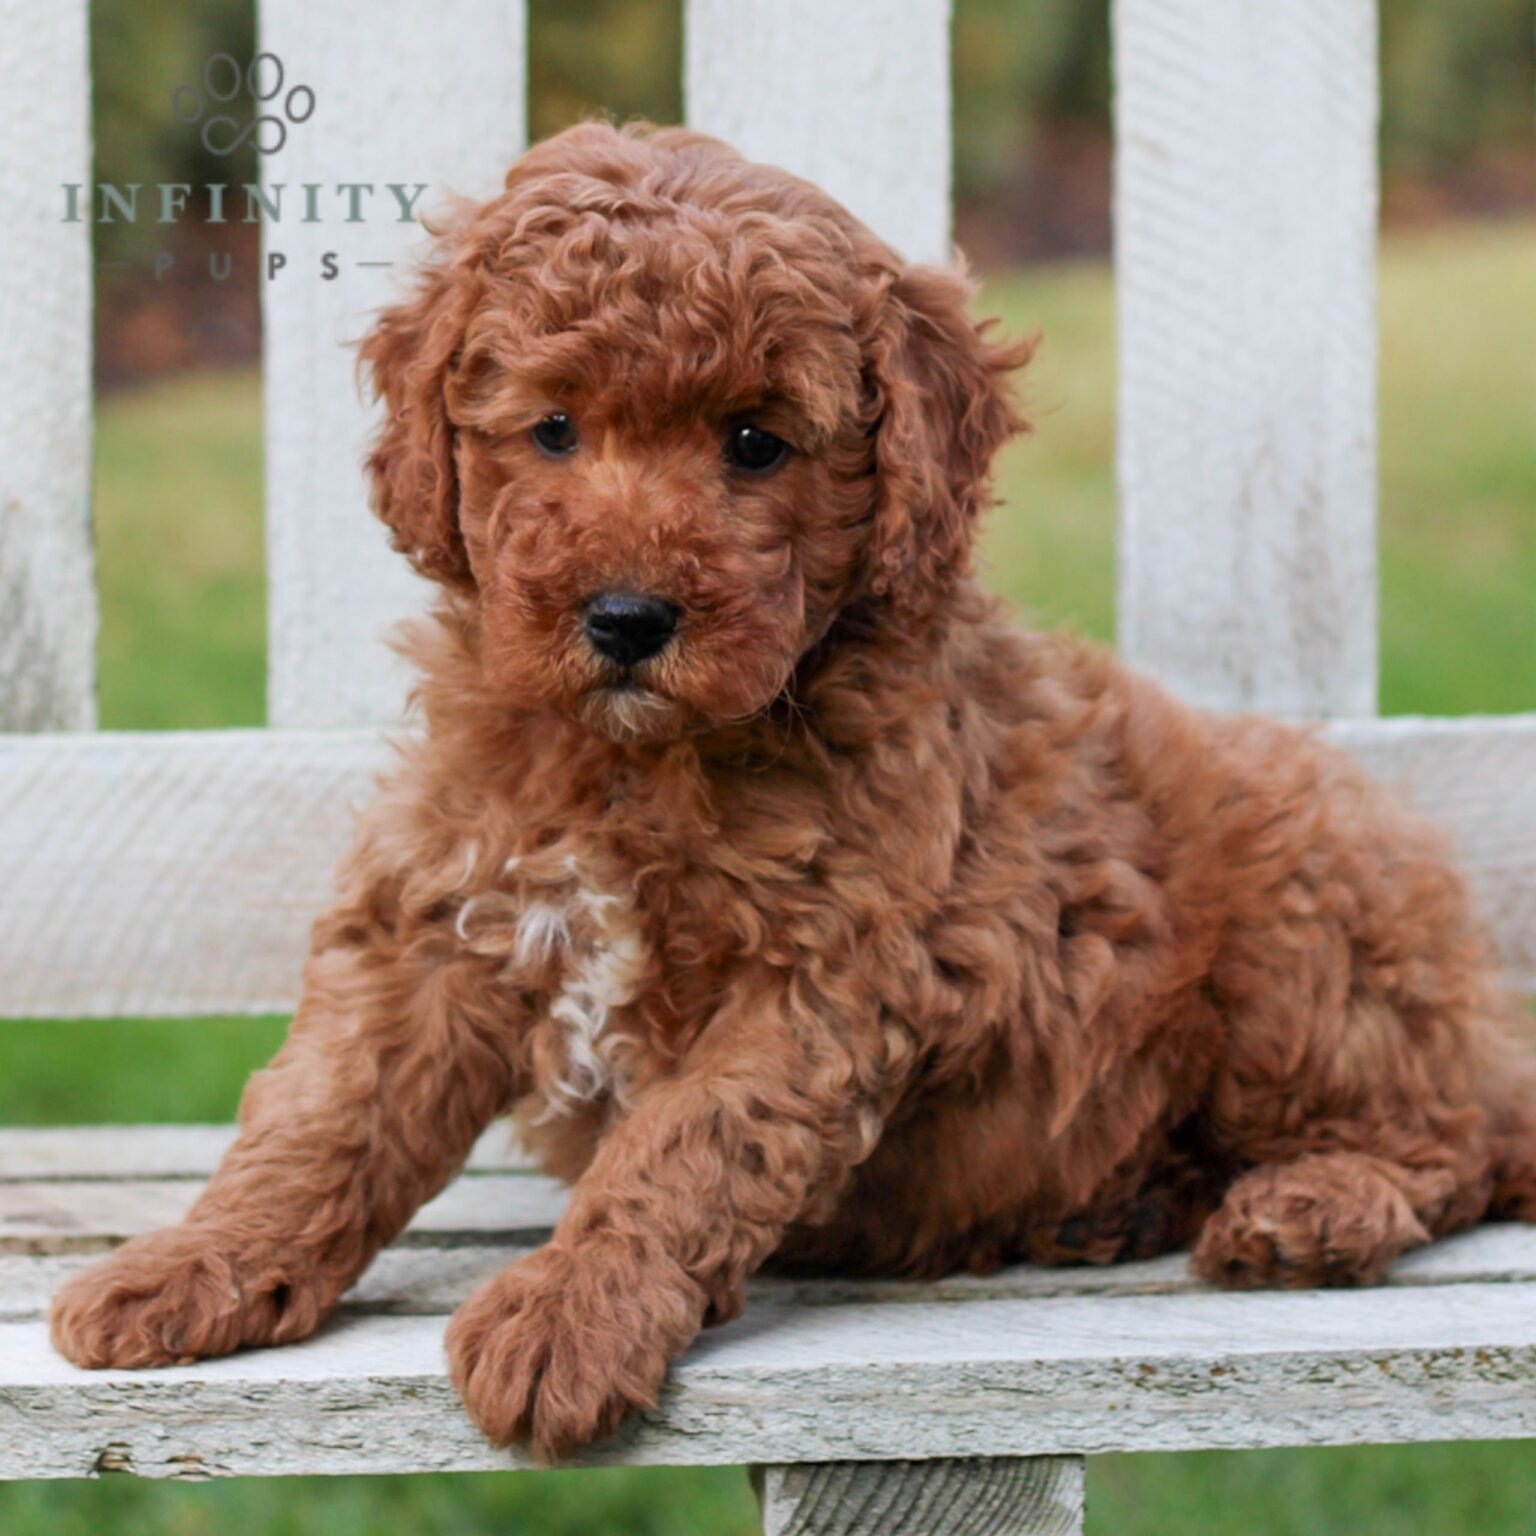 Star - Mini Goldendoodle puppy sitting